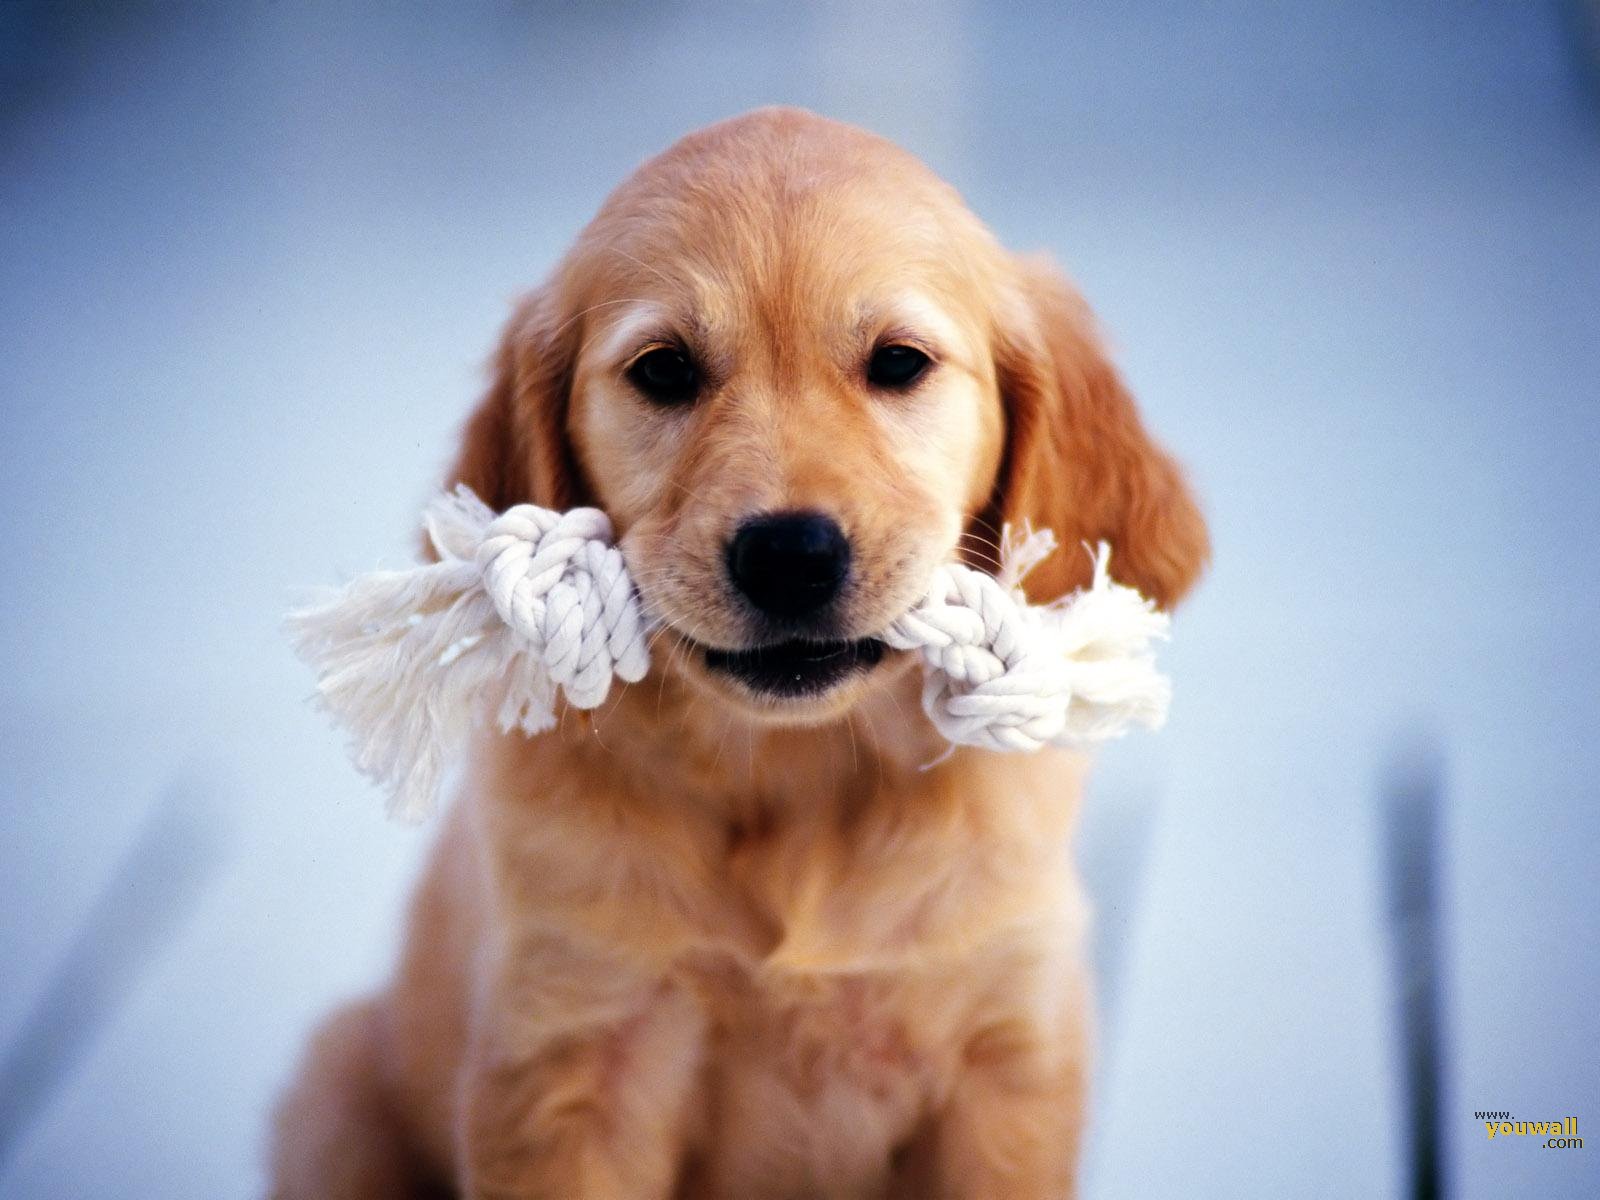 All Wallpapers Beautiful Dog Hd Wallpapers